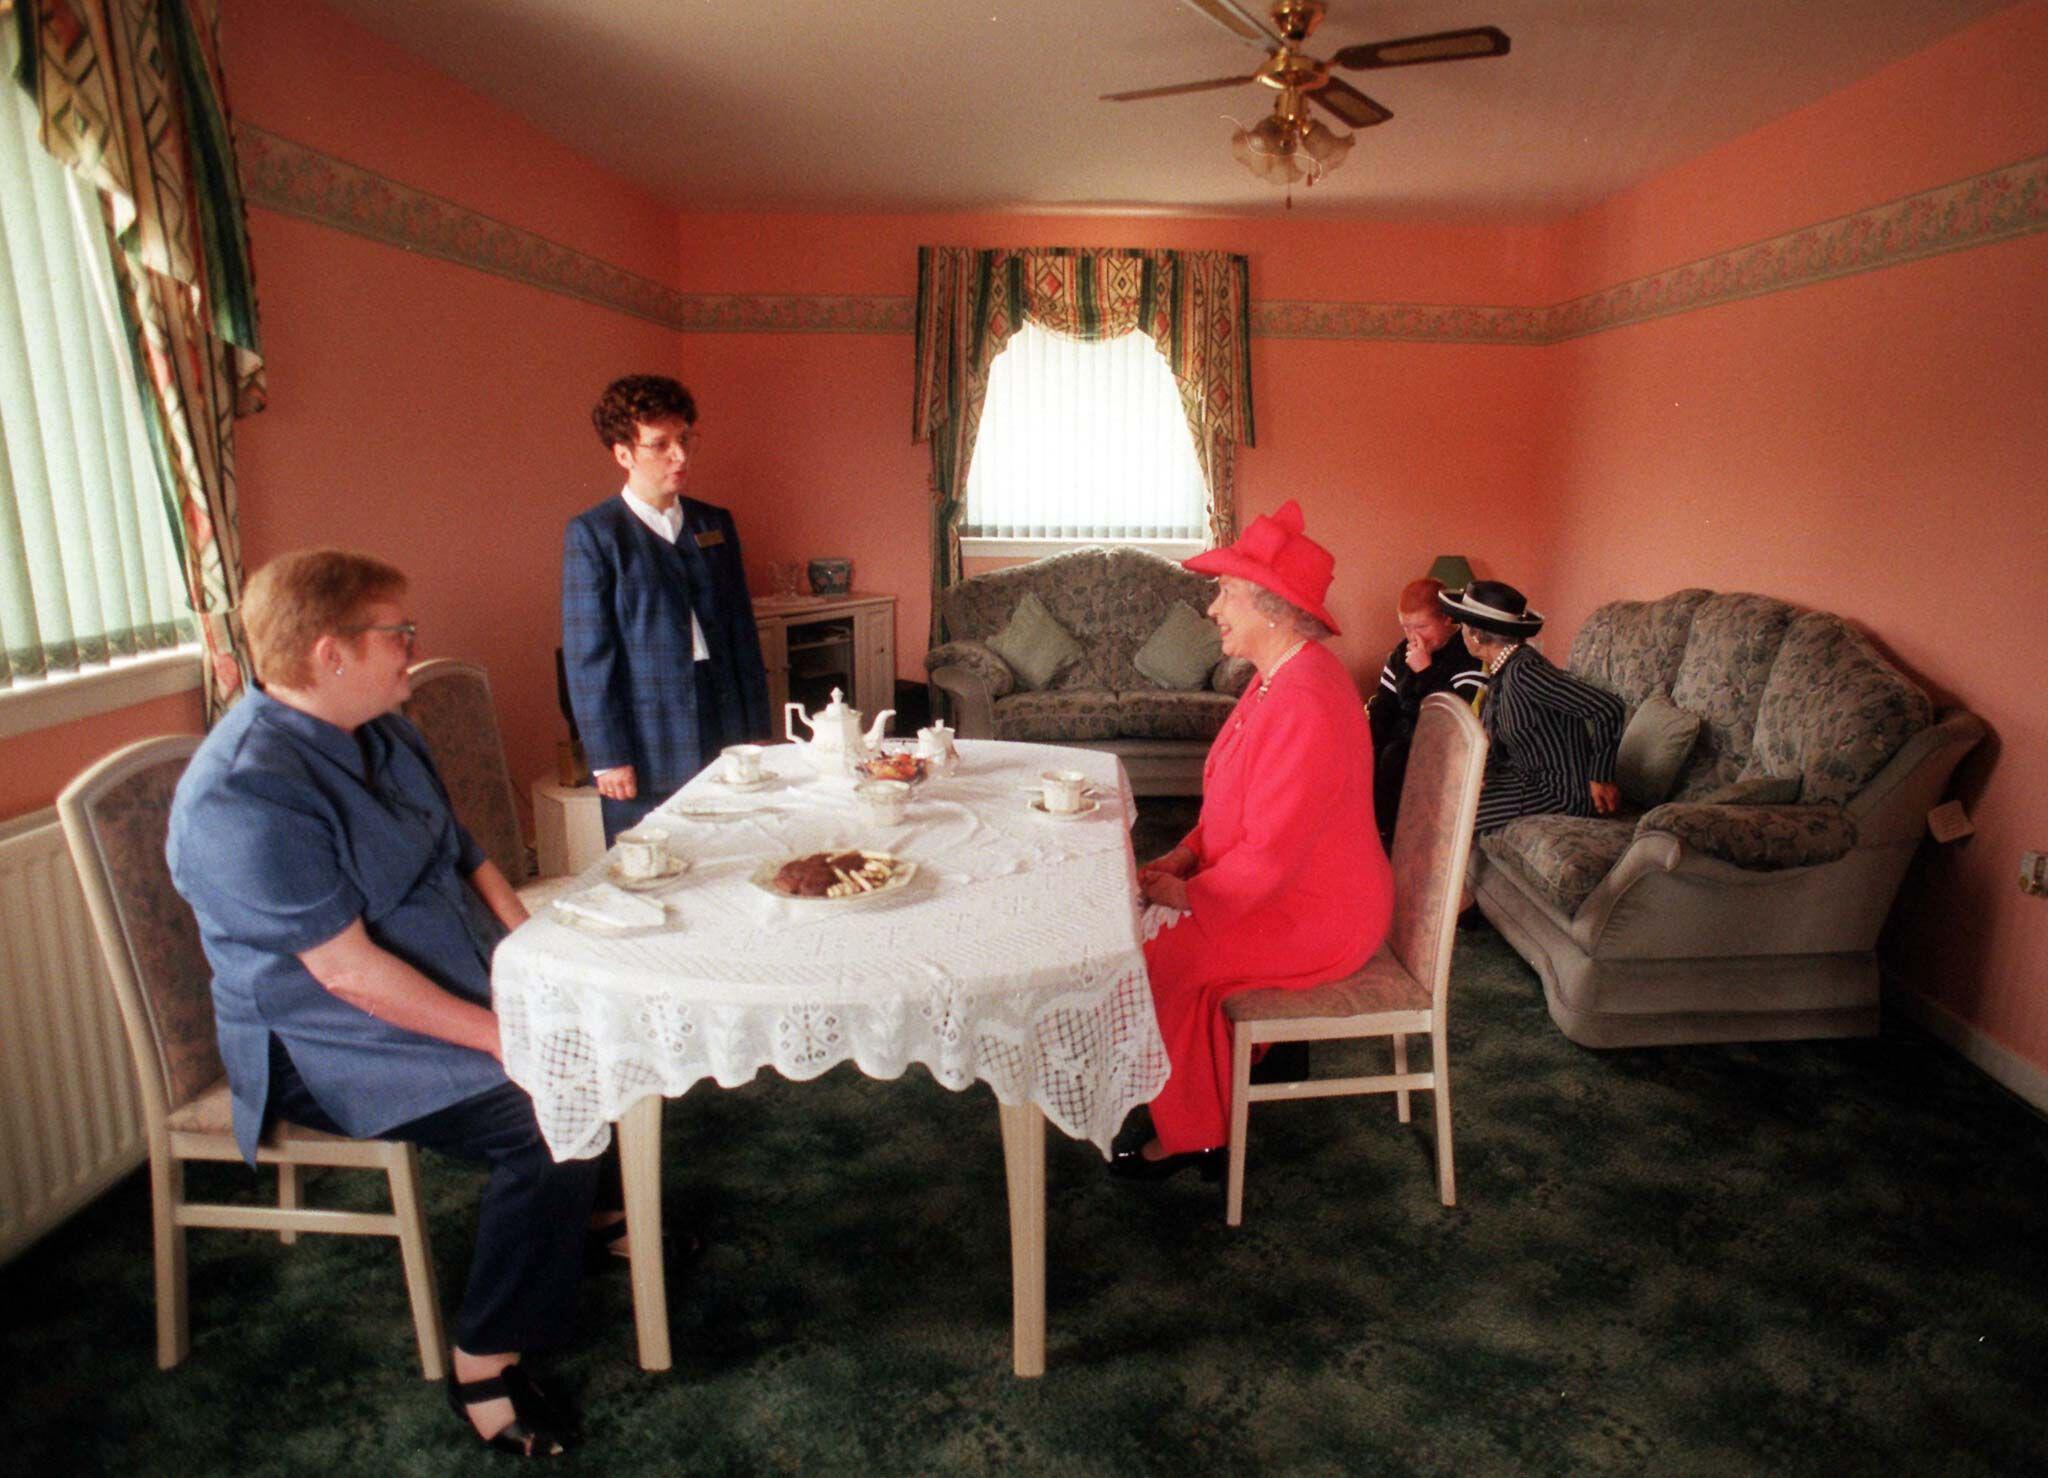 The Queen has tea with Susan McCarron (front left), her ten-year-old son James and housing manager Liz McGinniss, during a visit to Castlemilk in 1999.